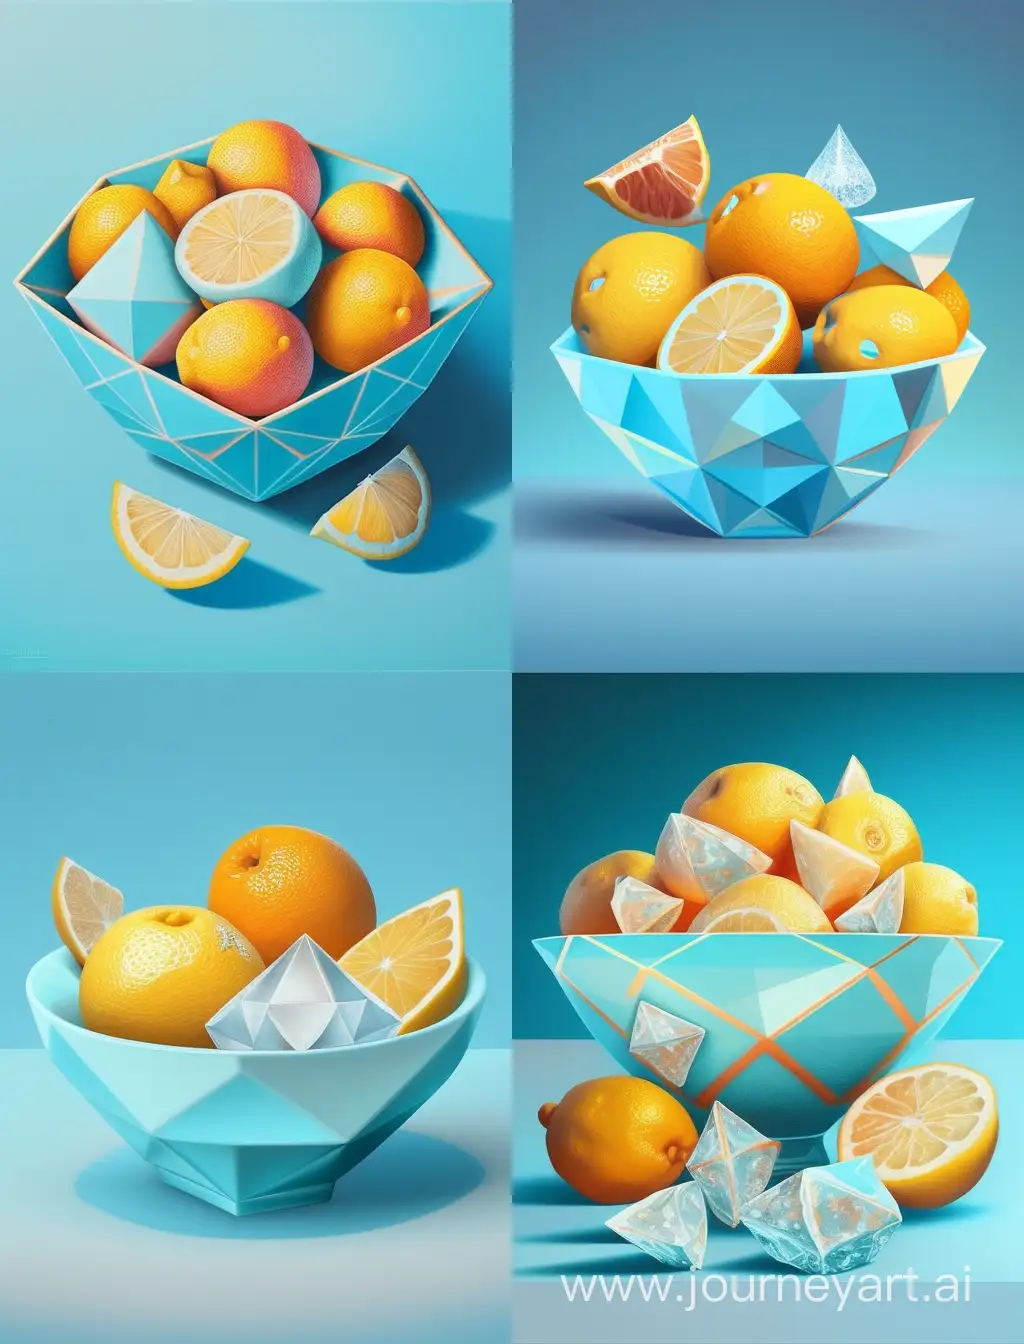 A bowl with lemmons and oranges on a 2d light blue background with diamond shapes